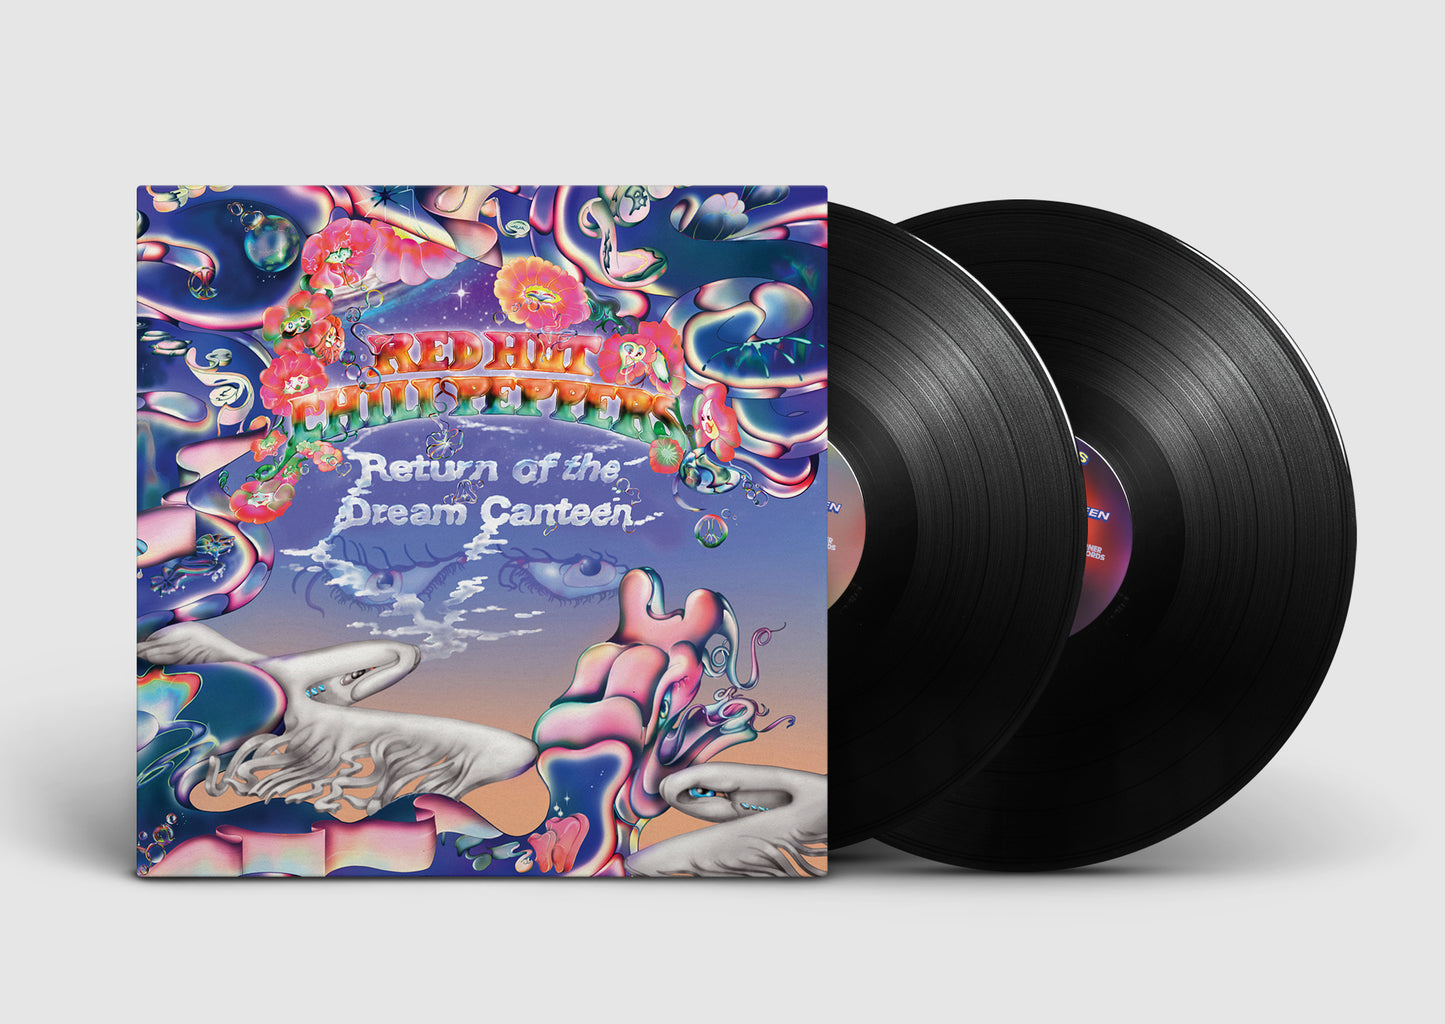 Red Hot Chili Peppers - Return of the Dream Canteen - Vinyl